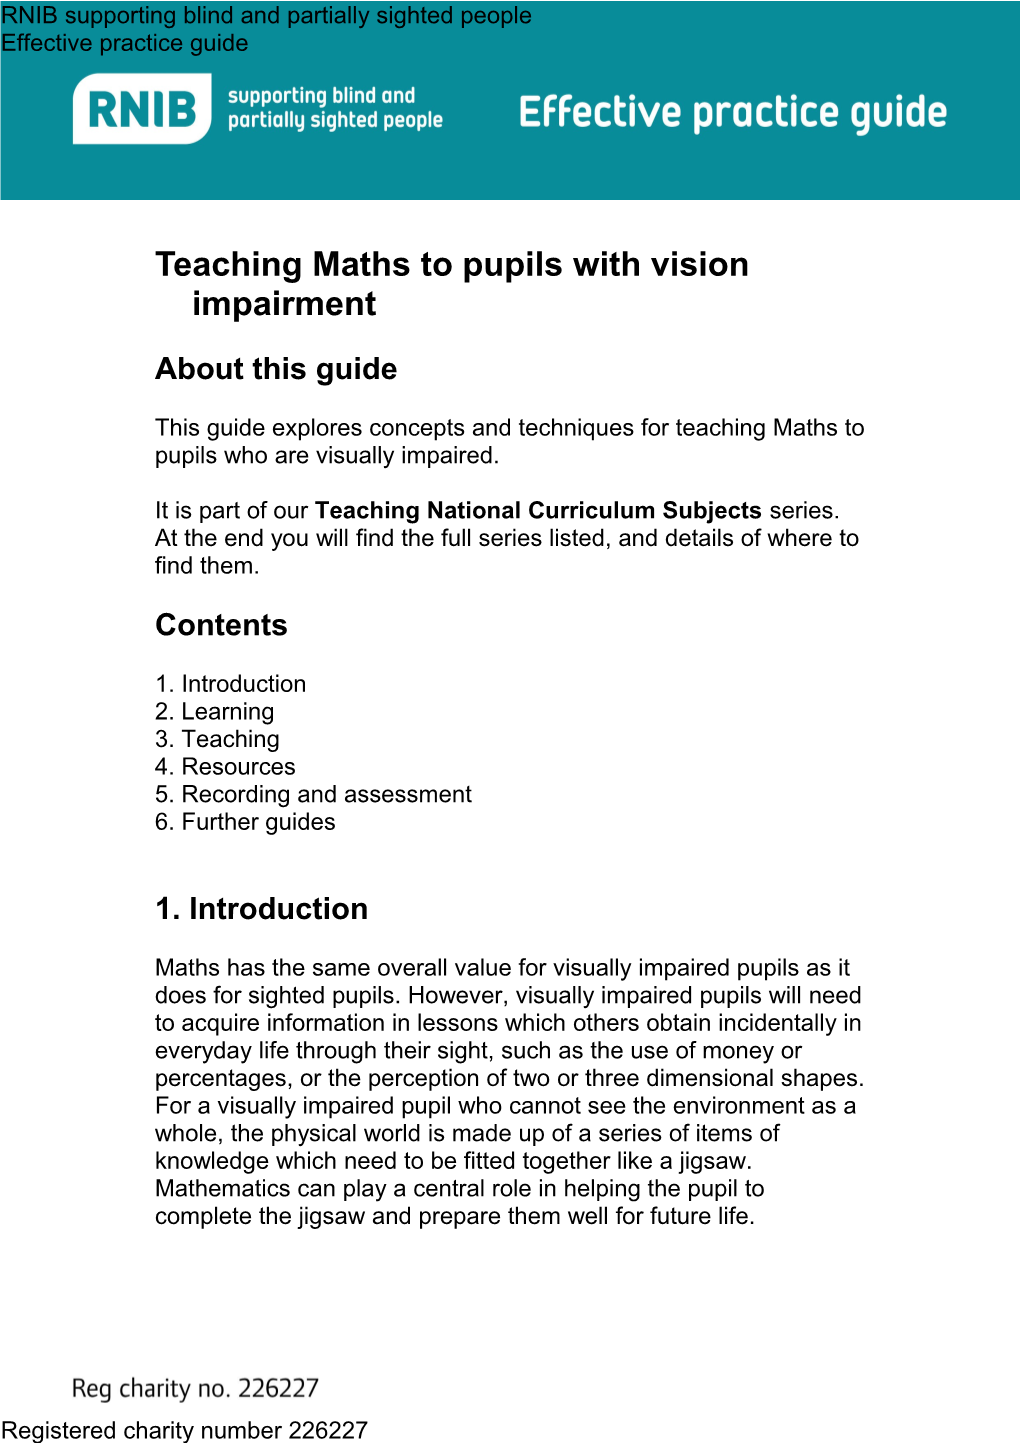 Teaching Maths to Pupils with Vision Impairment